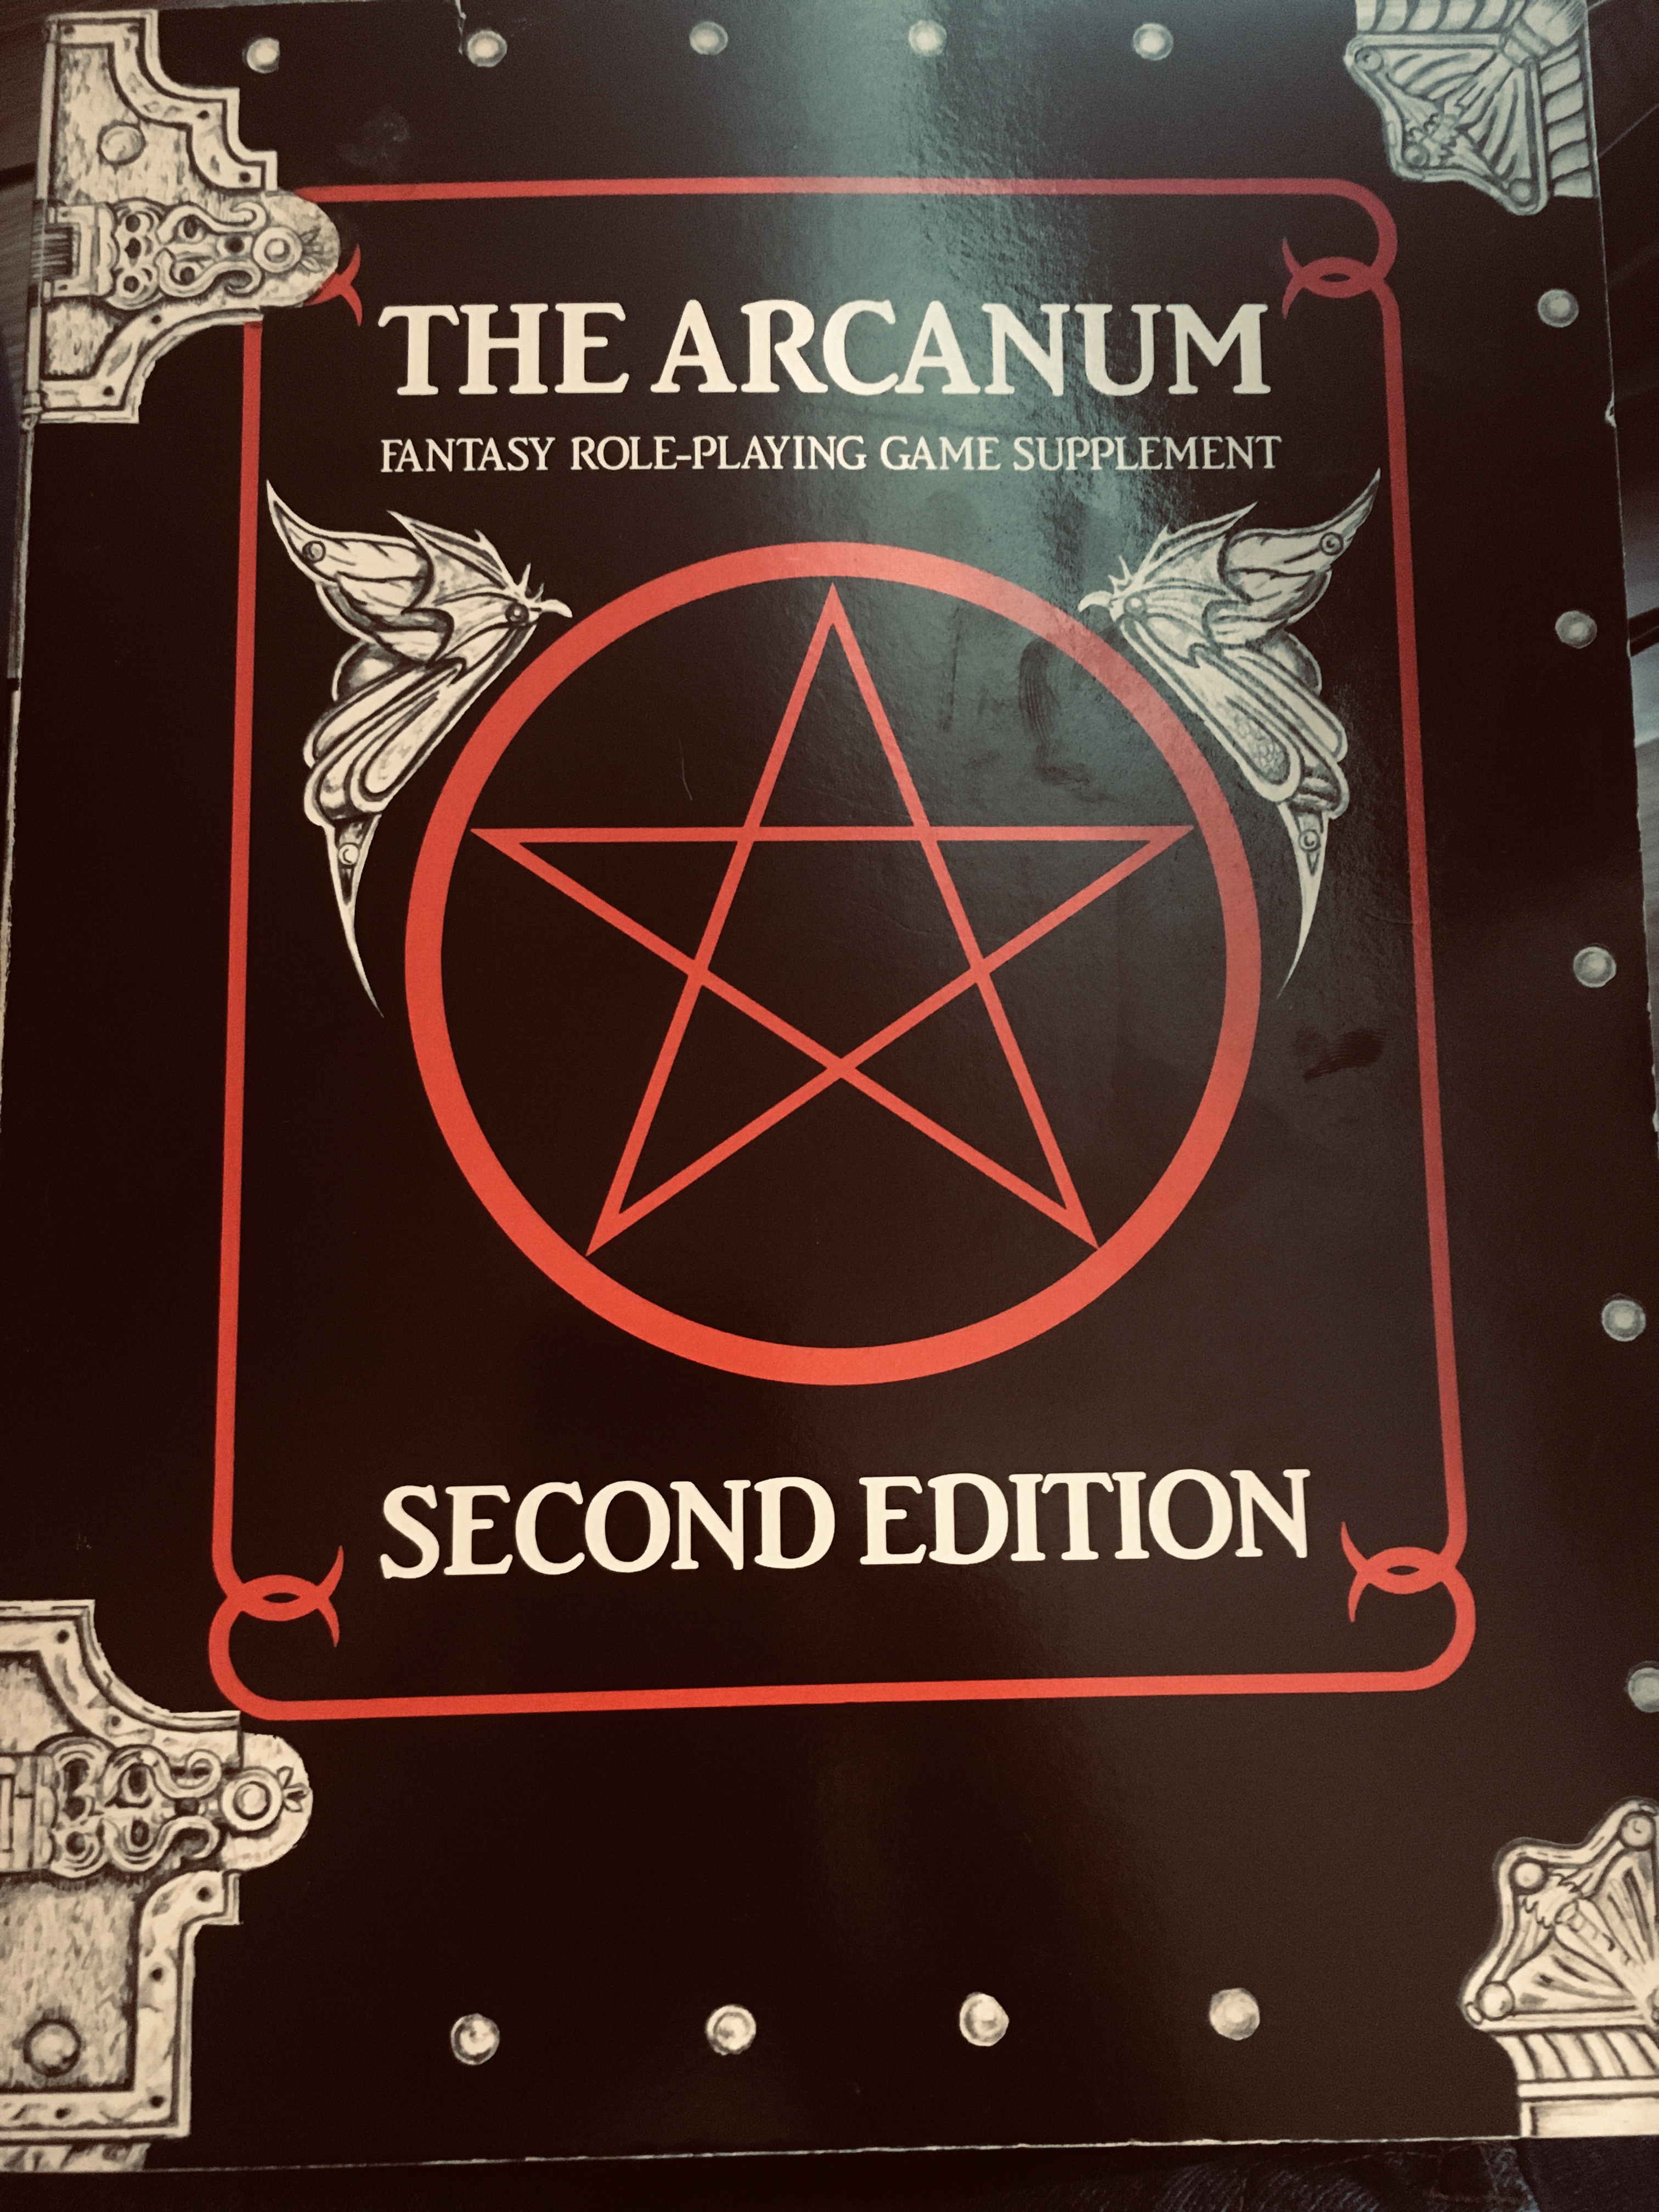 Arcanium download the last version for apple